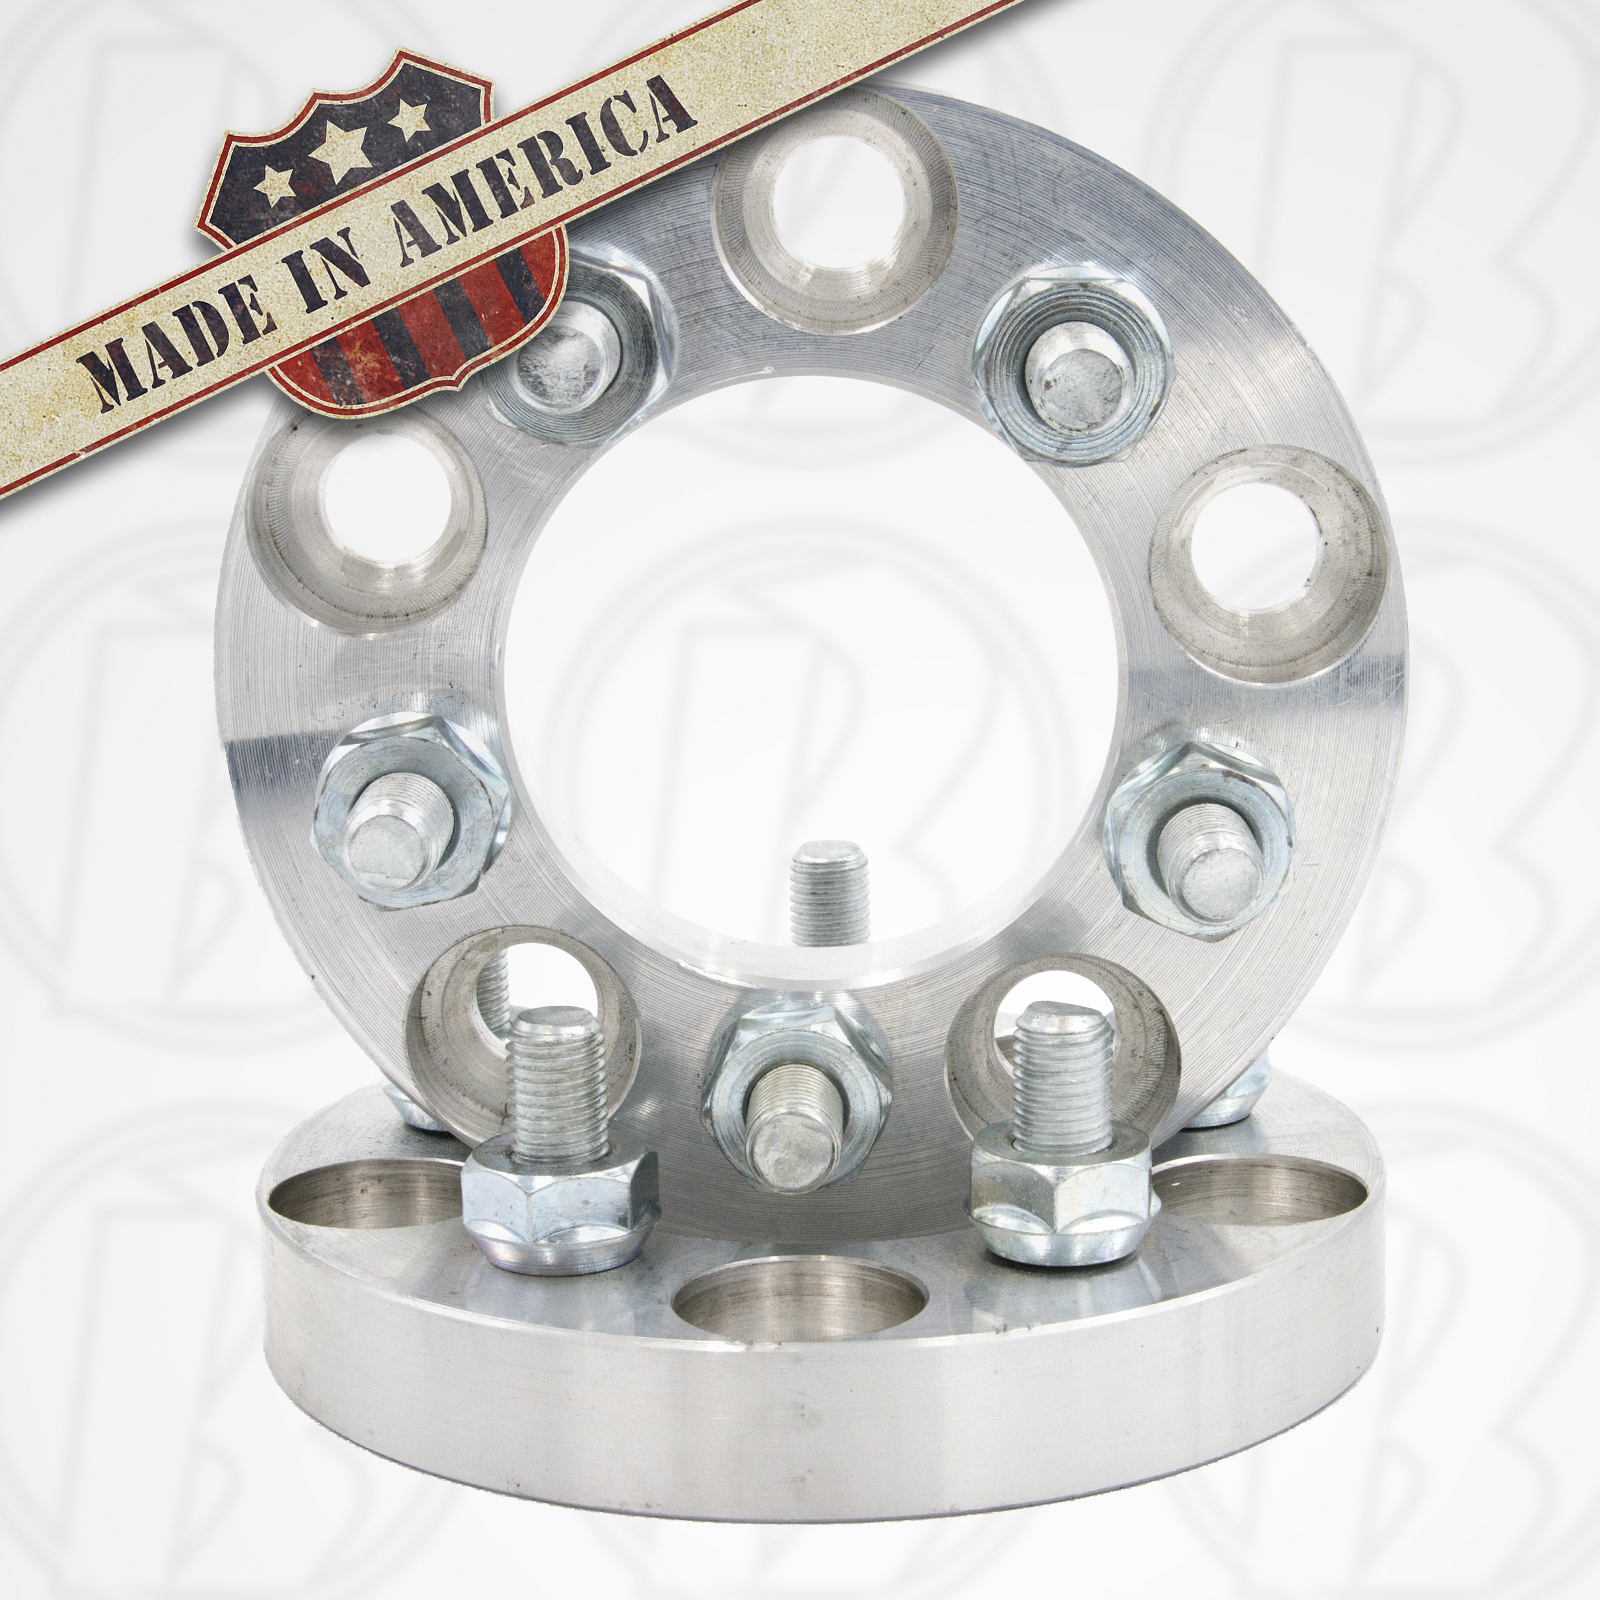 5x120 To 5x120 Wheel Adapters / 3/4" Spacers